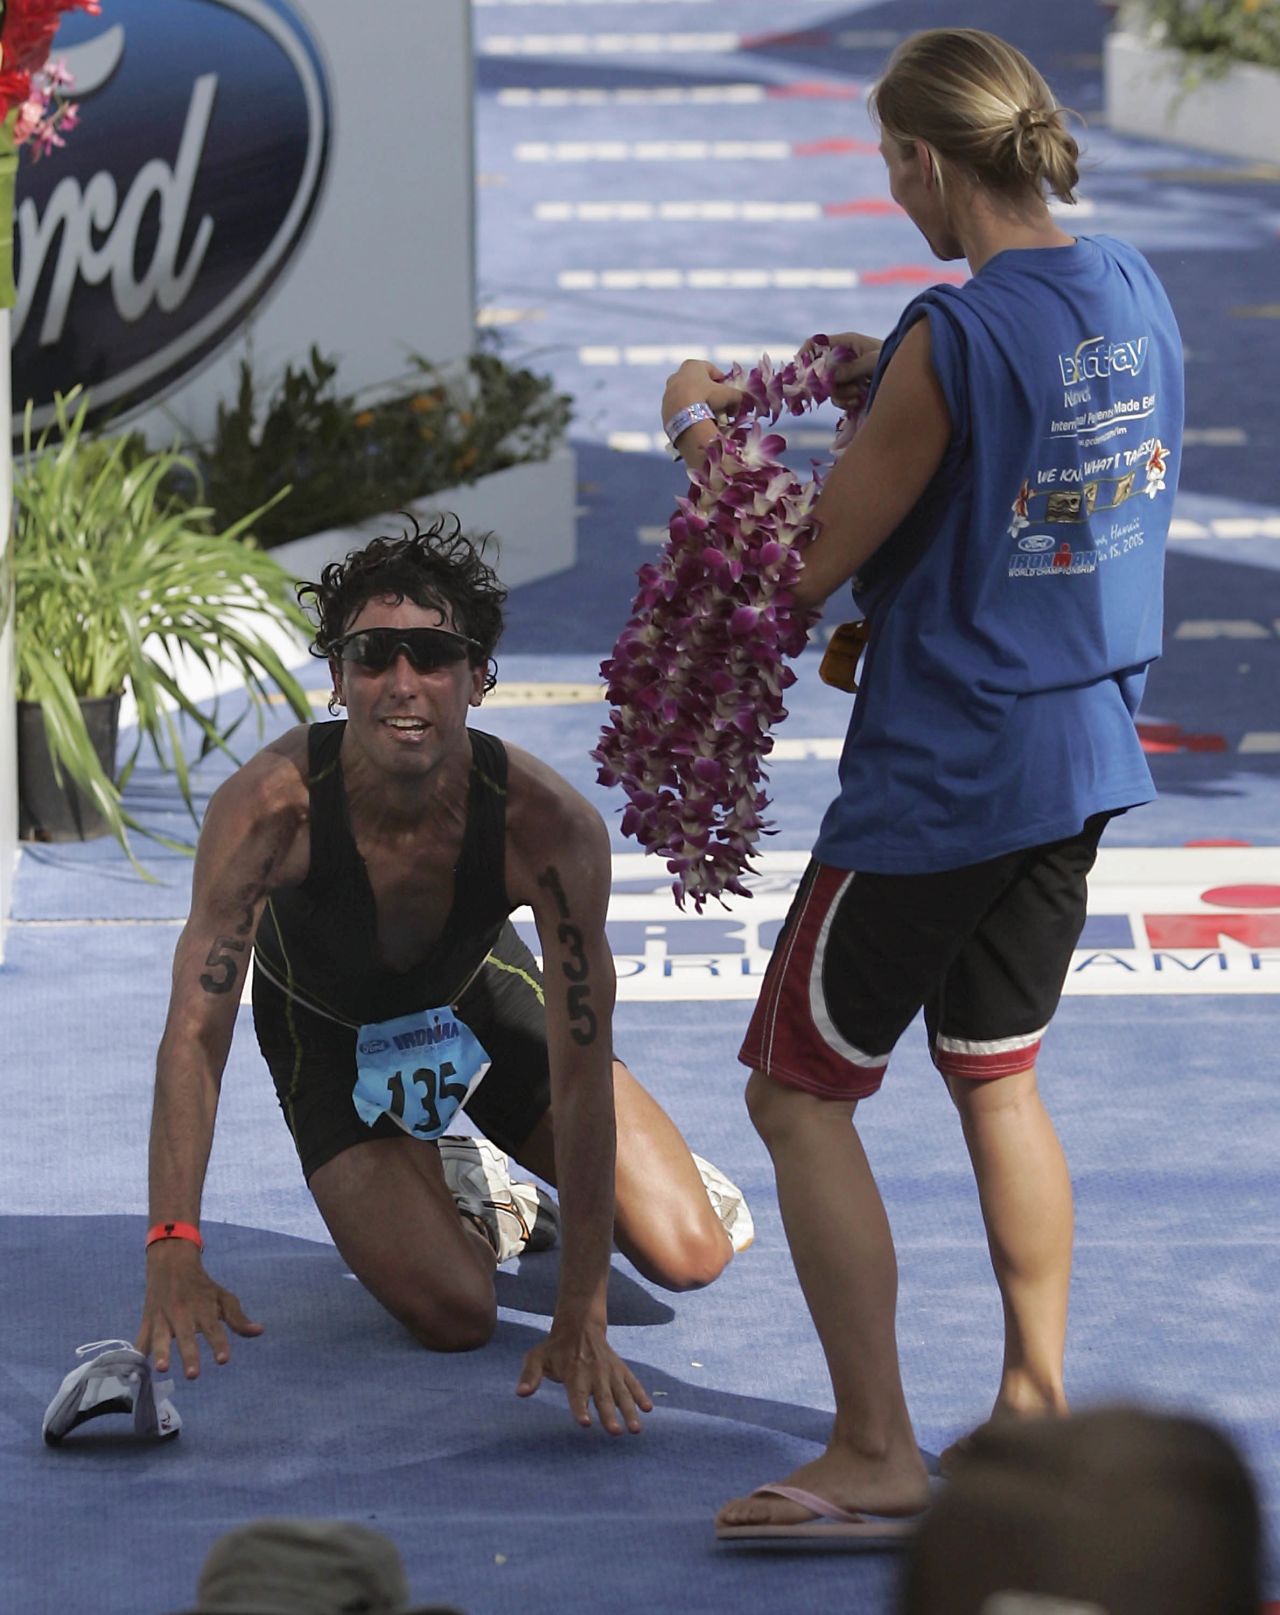 The Hawaii Ironman is the most famous event in triathlon but also among its toughest. Intense heat and crosswinds bring competitors to their knees as they tackle the 3.8km swim, 180km bike ride and marathon run on Kona Island.  